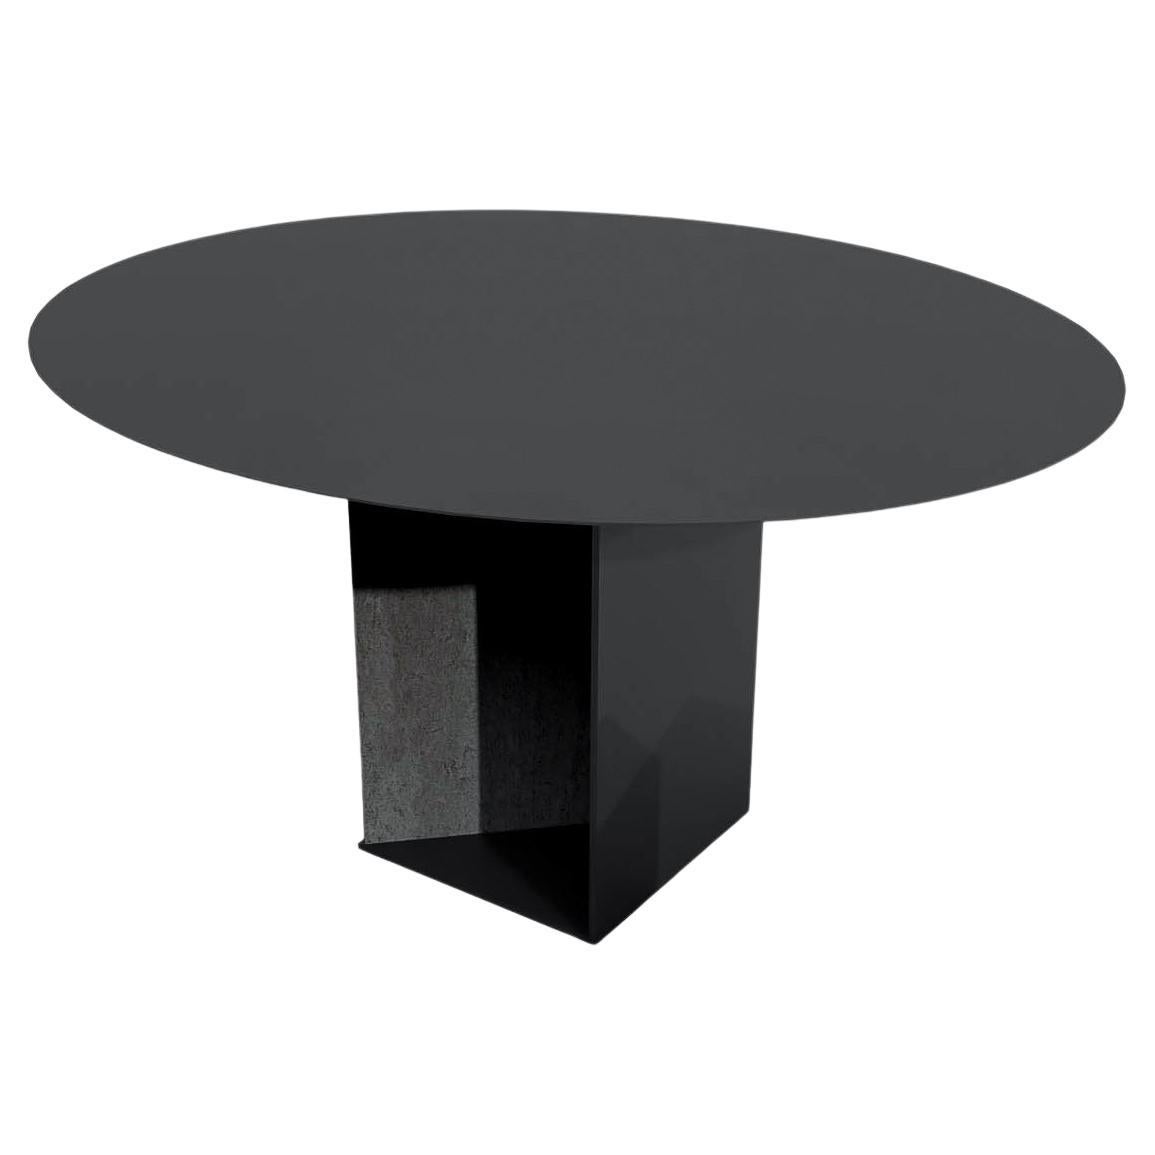 Contemporary Round Table, Black Powdercoated Steel & Travertin, Barh Judd Table For Sale